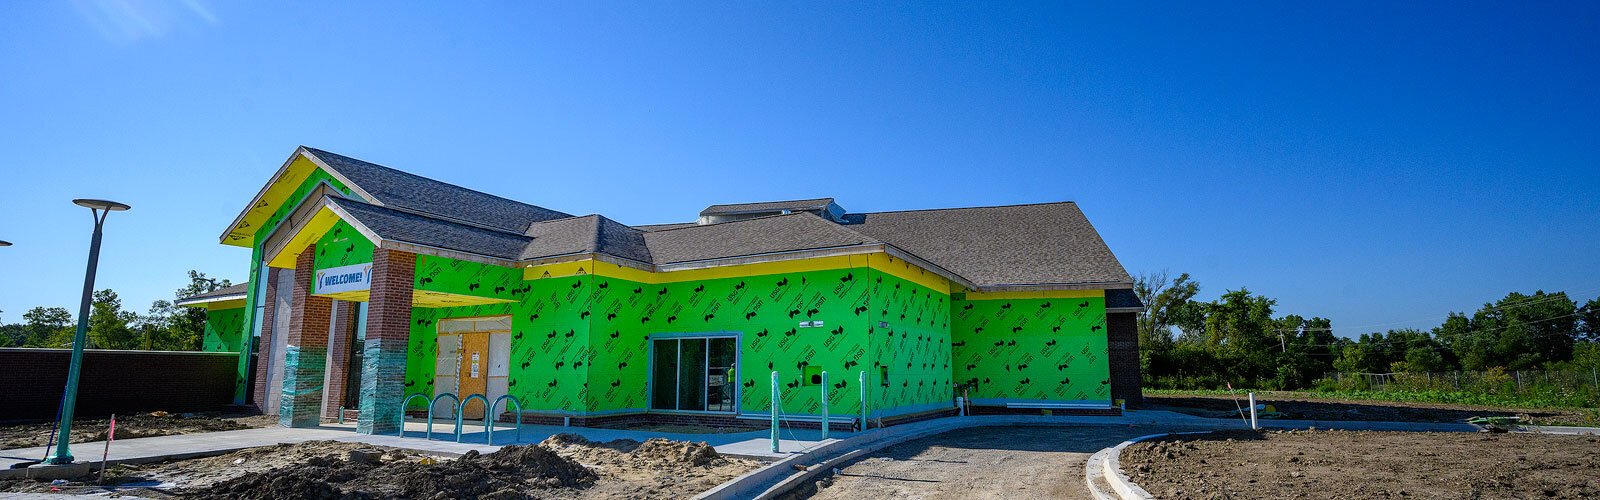 The Ypsilanti District Library's new branch in Superior Township under construction.